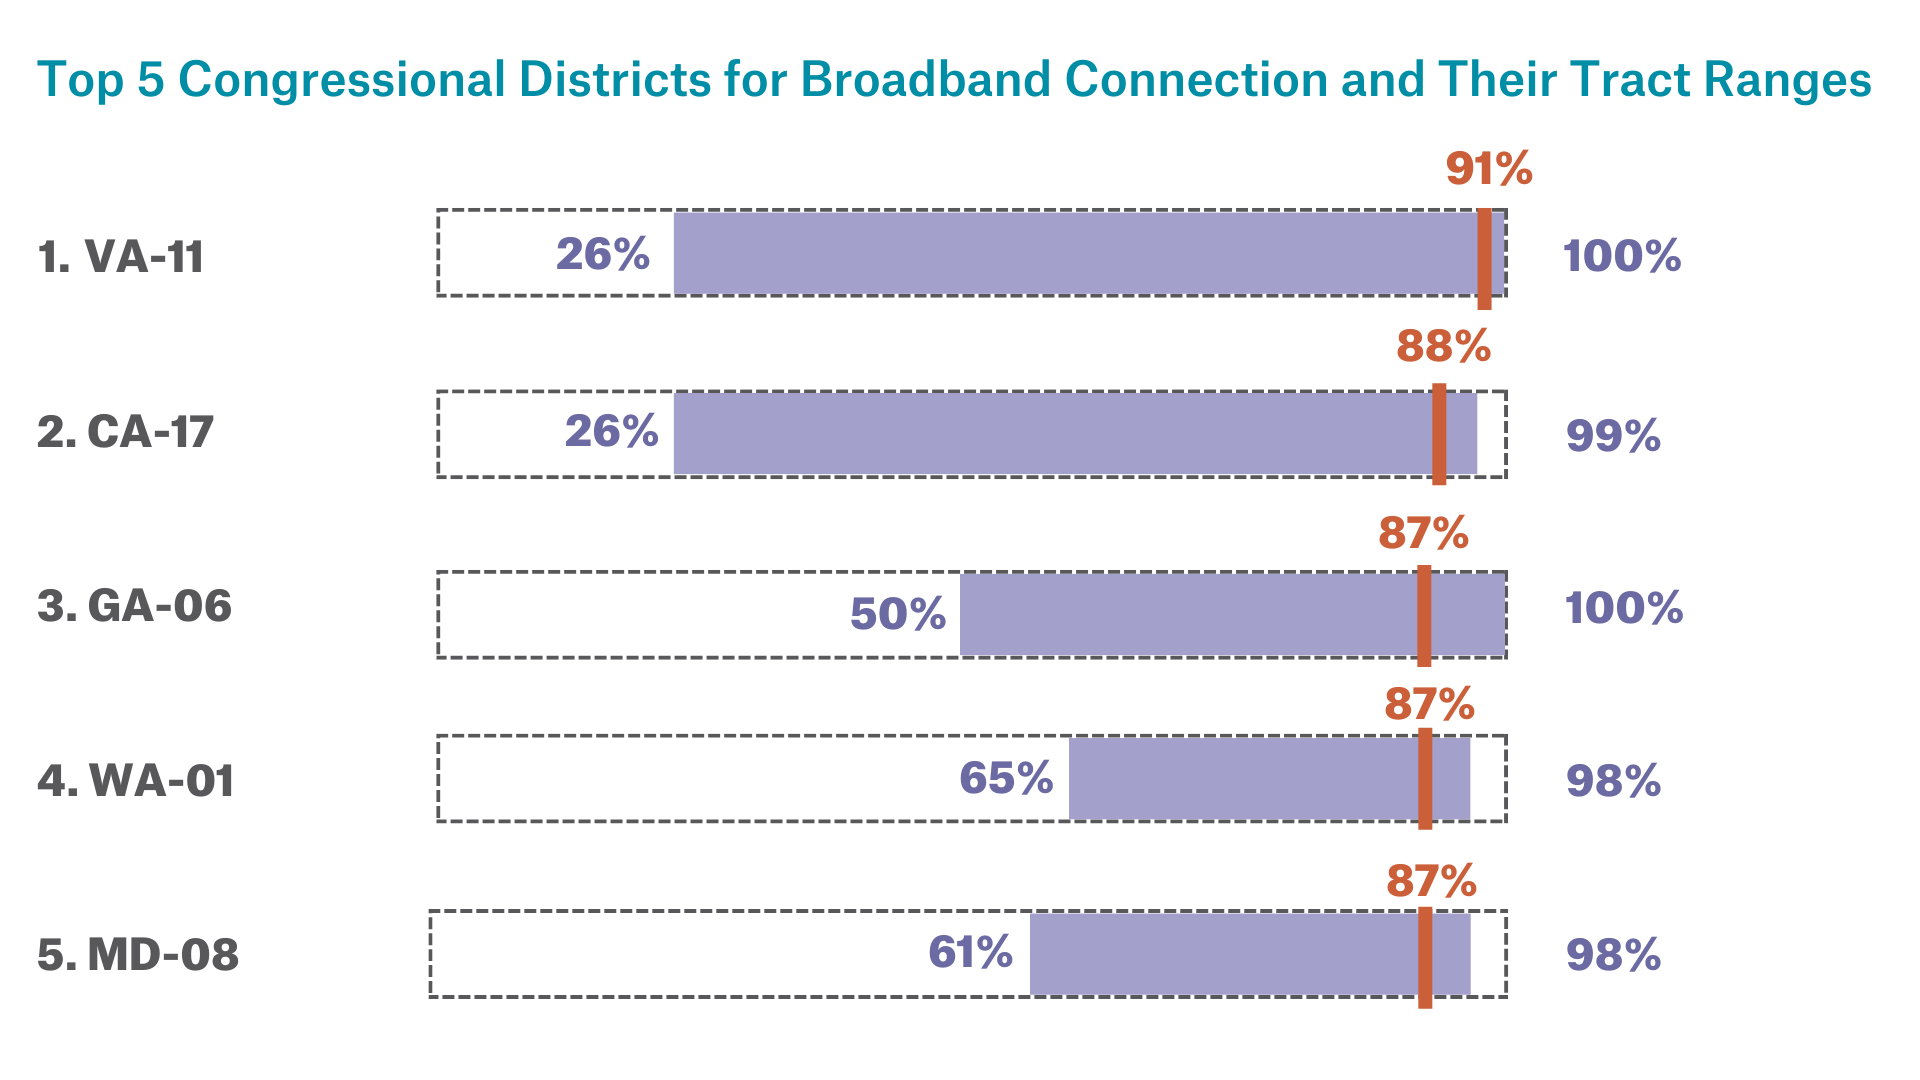 Top 5 Congressional Districts for Broadband Connection and Their Tract Ranges